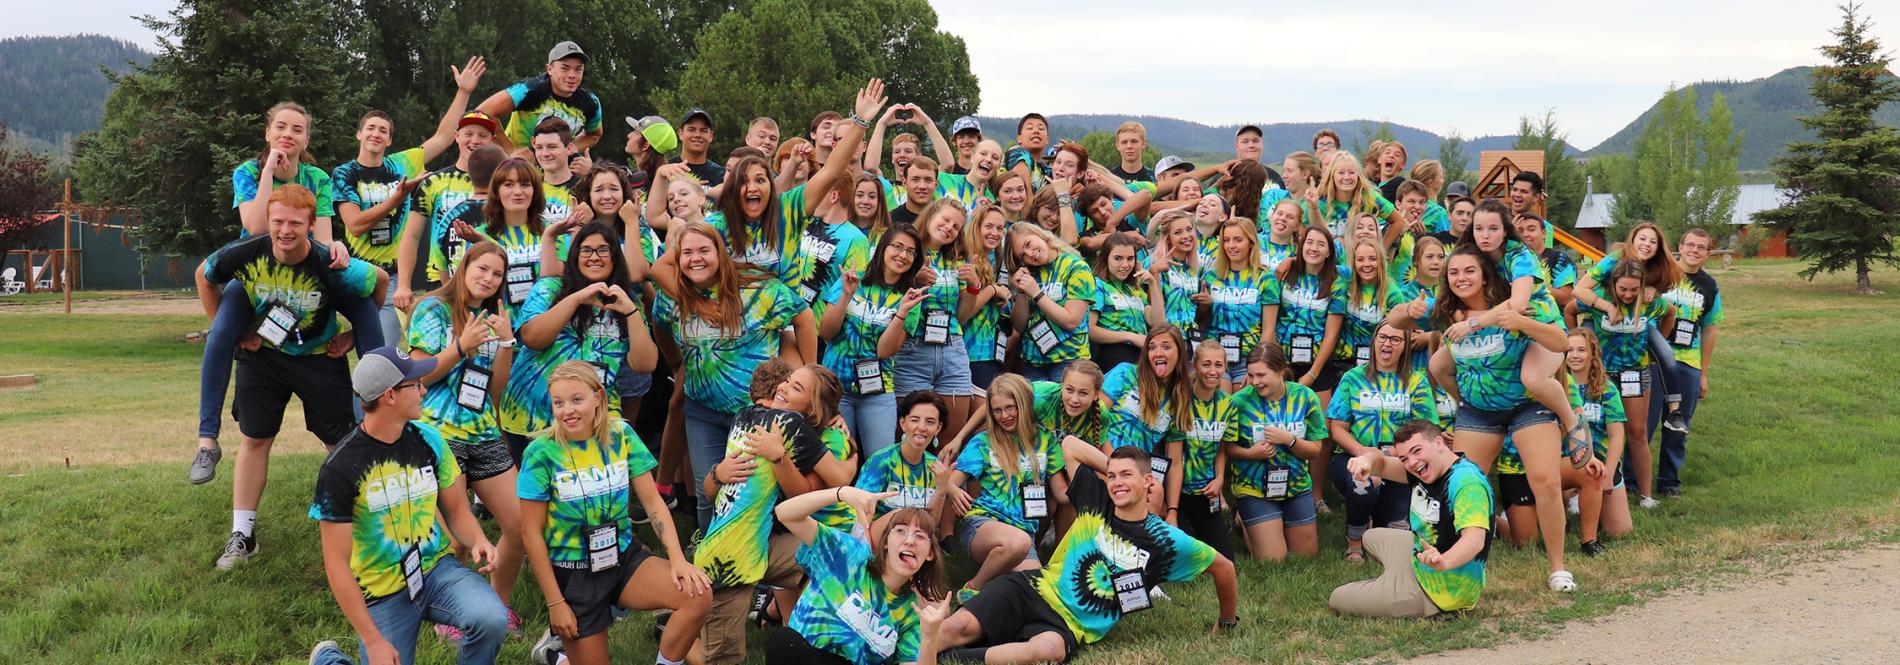 LPEA seeking applicants for Cooperative Youth Leadership Camp